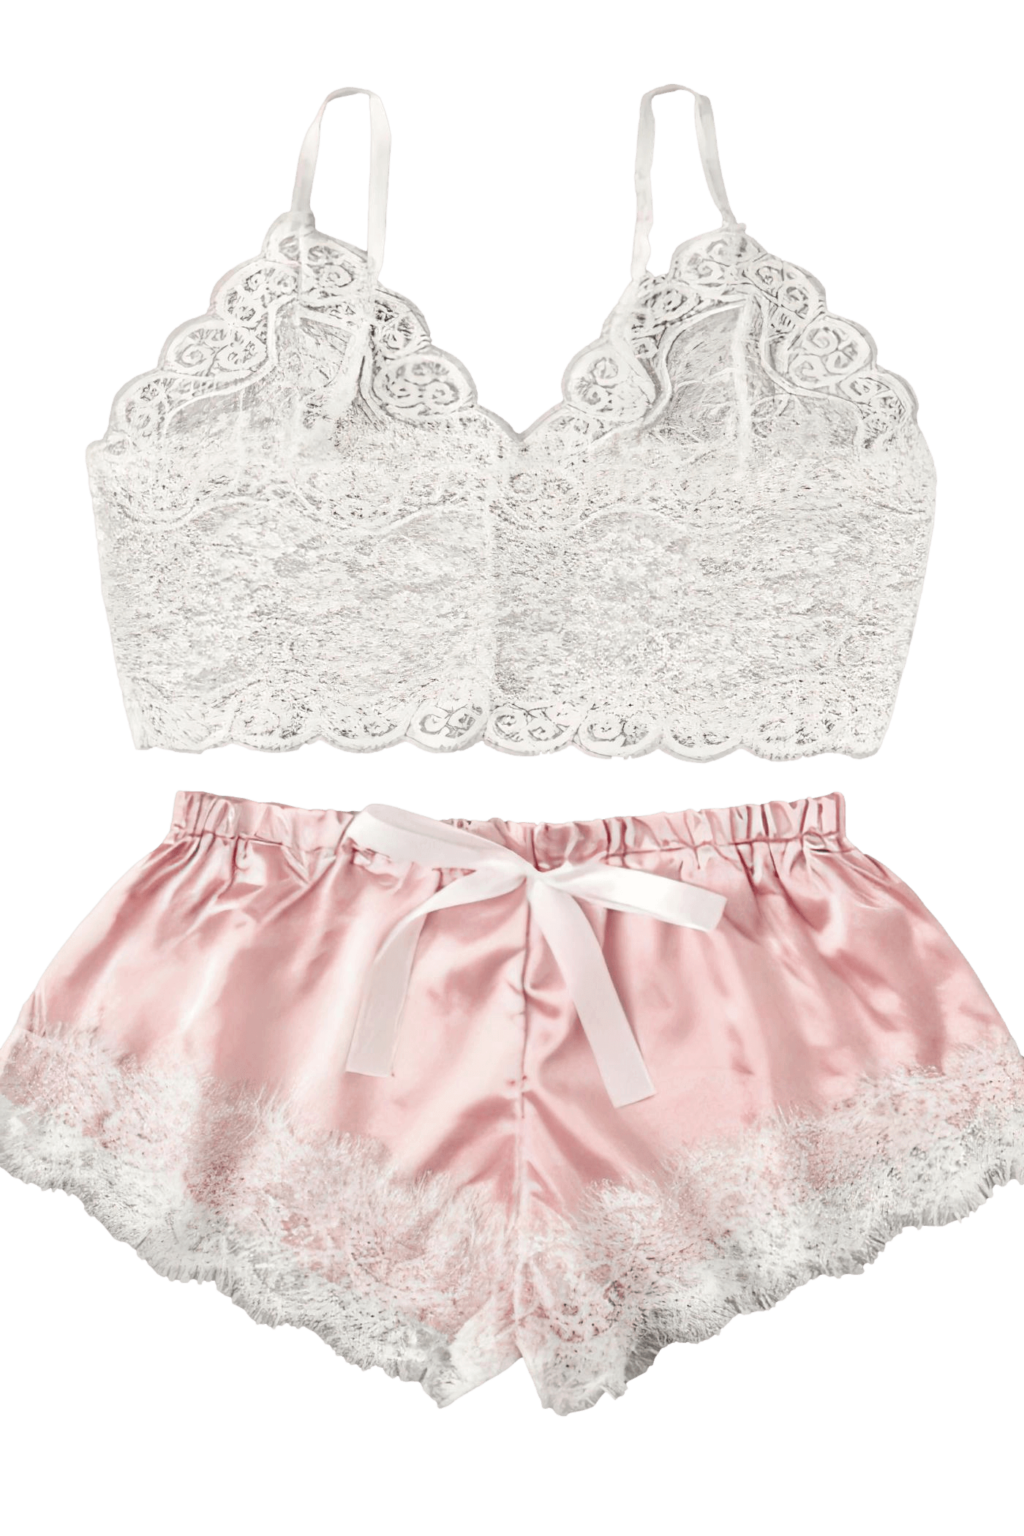 My Secret Drawer® Sweet Innocence Lace and Satin Slumberwear Tops with Sexy Lacy Shorts